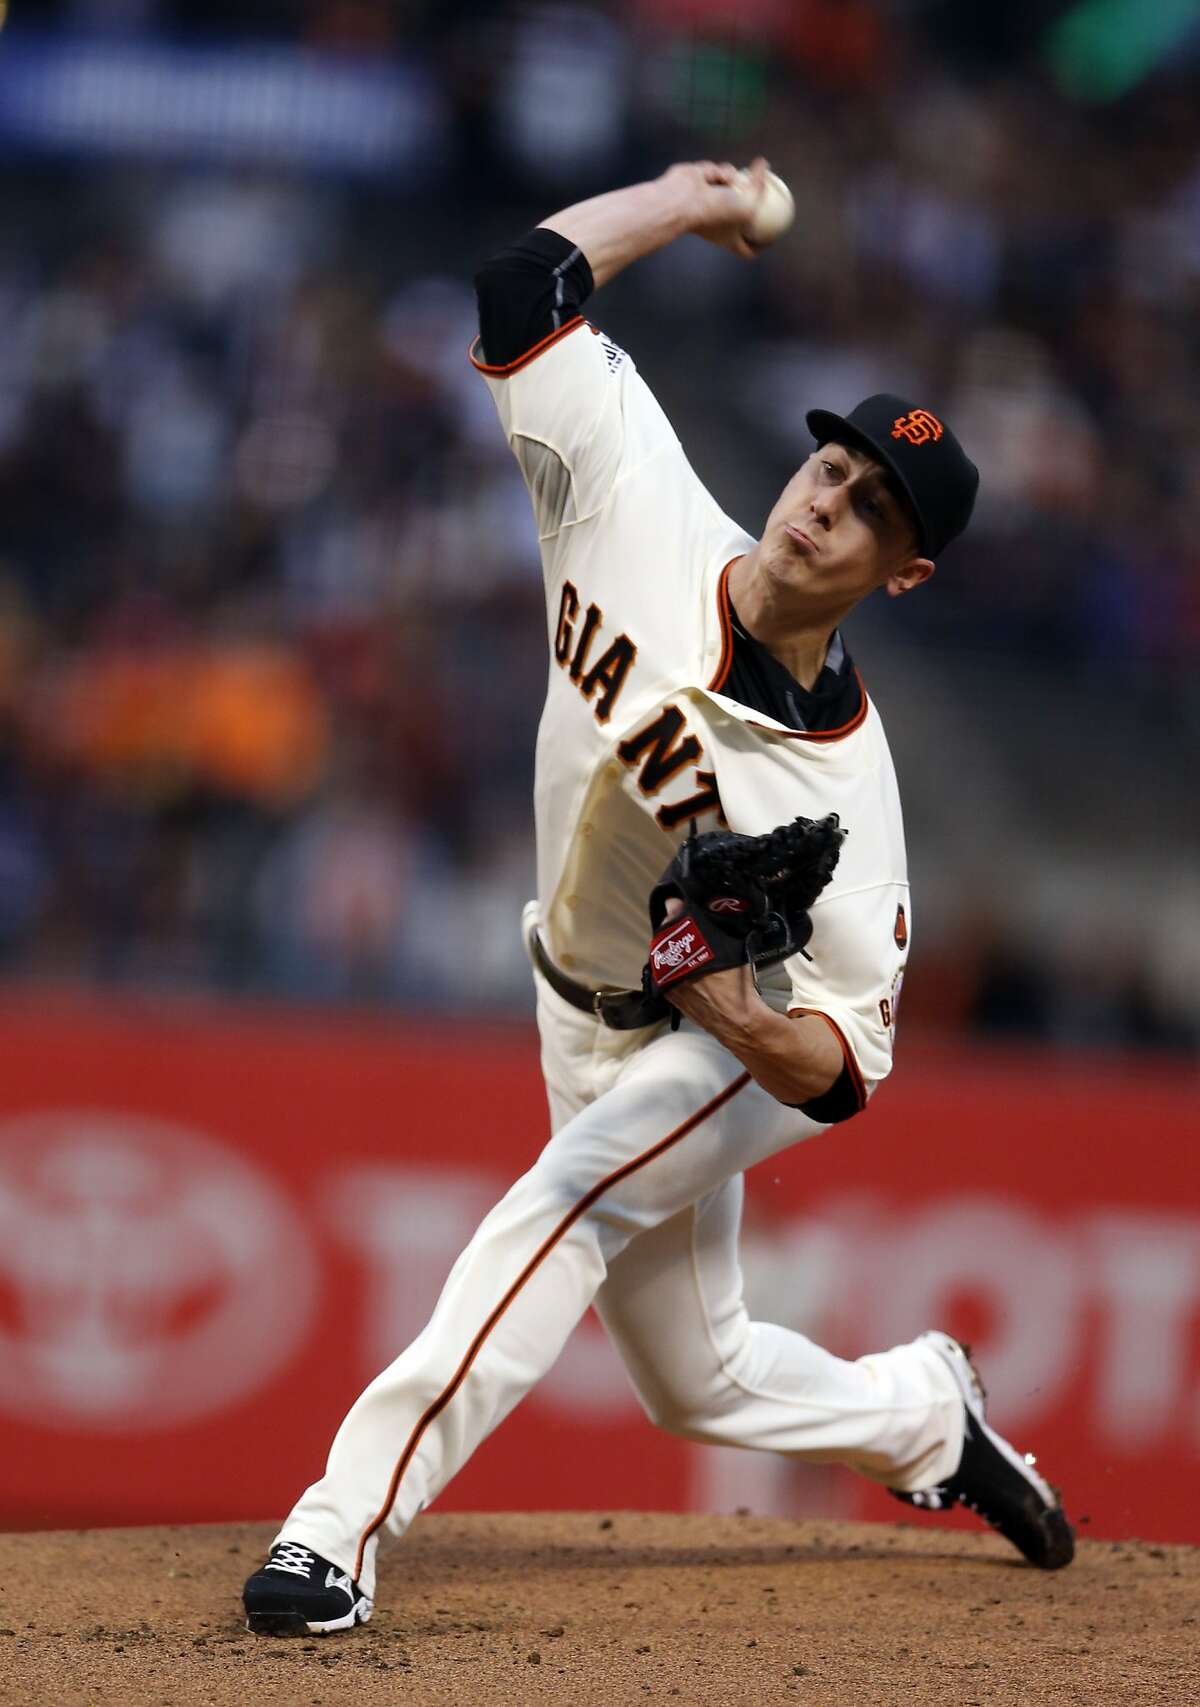 San Francisco Giants' Tim Lincecum delivers in 1st inning against Los Angeles Dodgers during MLB game at AT&T Park in San Francisco, Calif., on Tuesday, April 21, 2015.